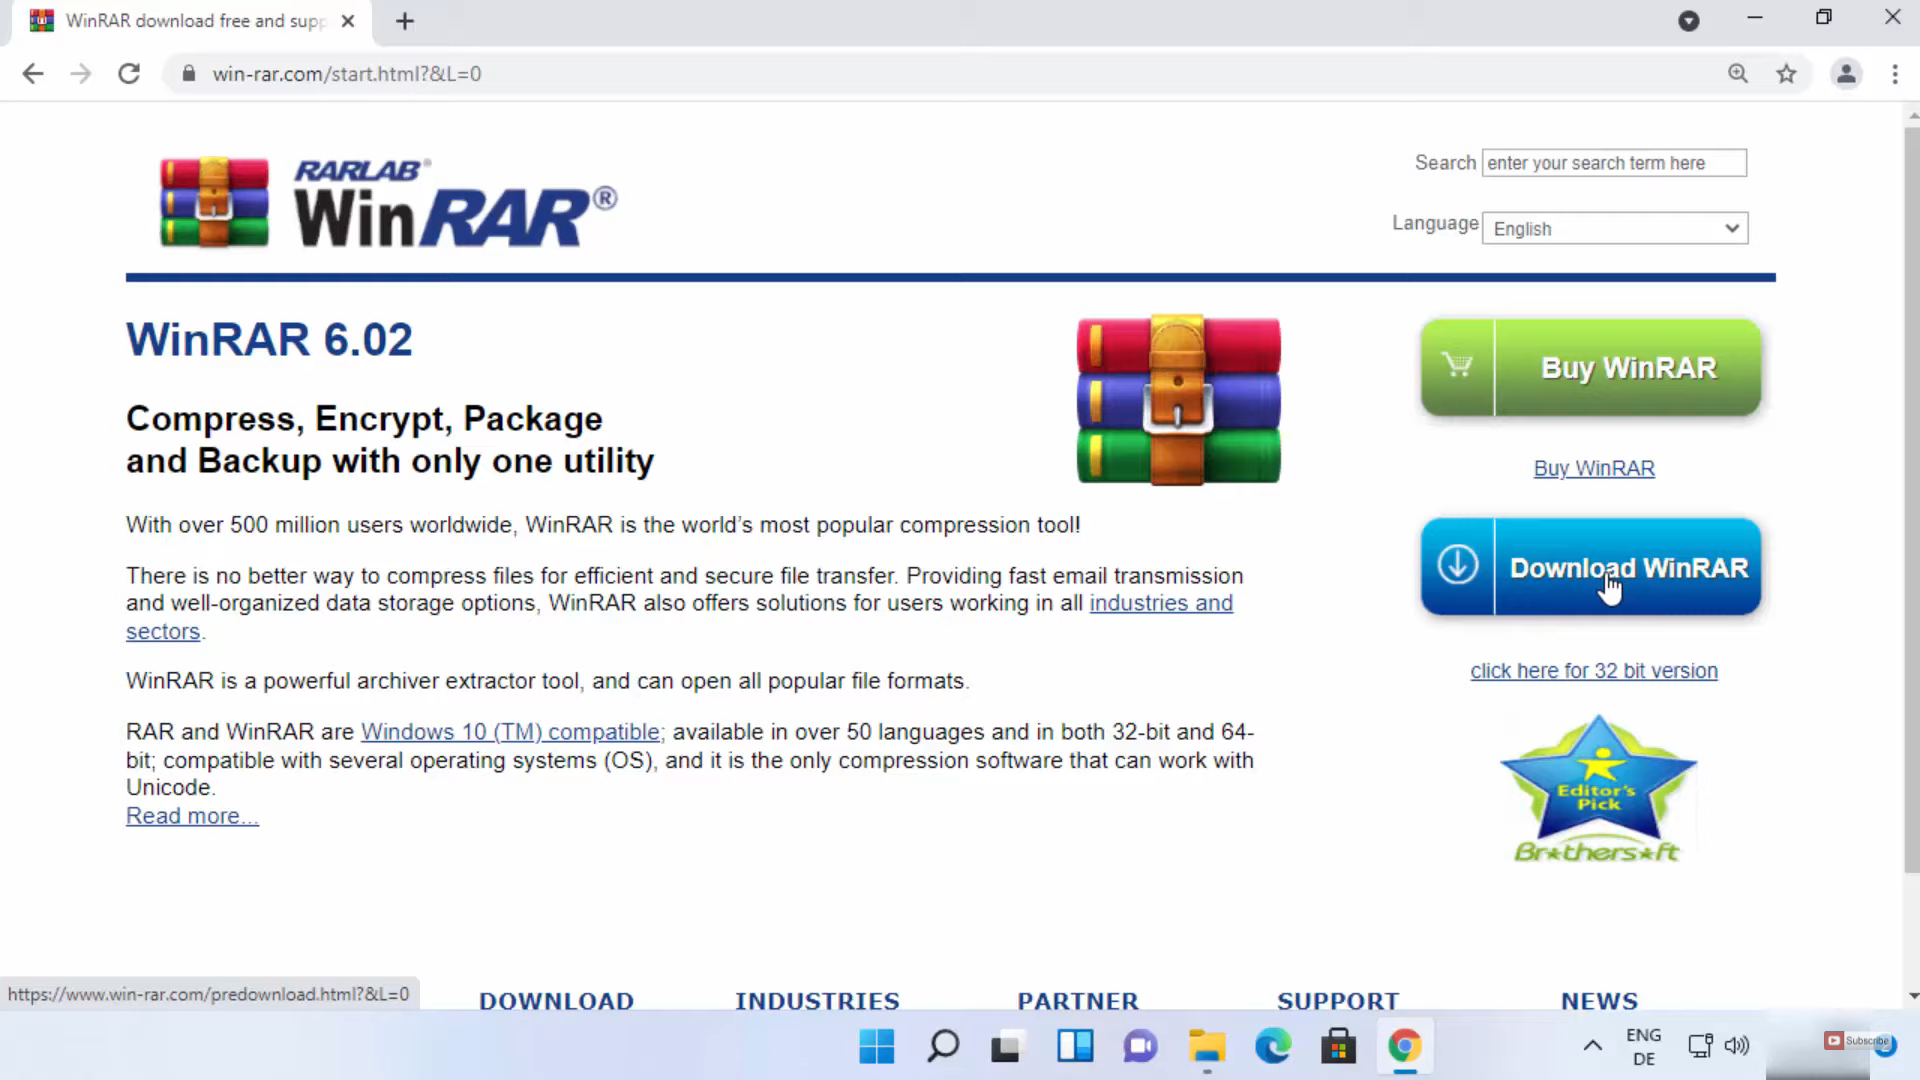 Download and install WinRAR from the official website.
Launch WinRAR by double-clicking on its desktop icon.